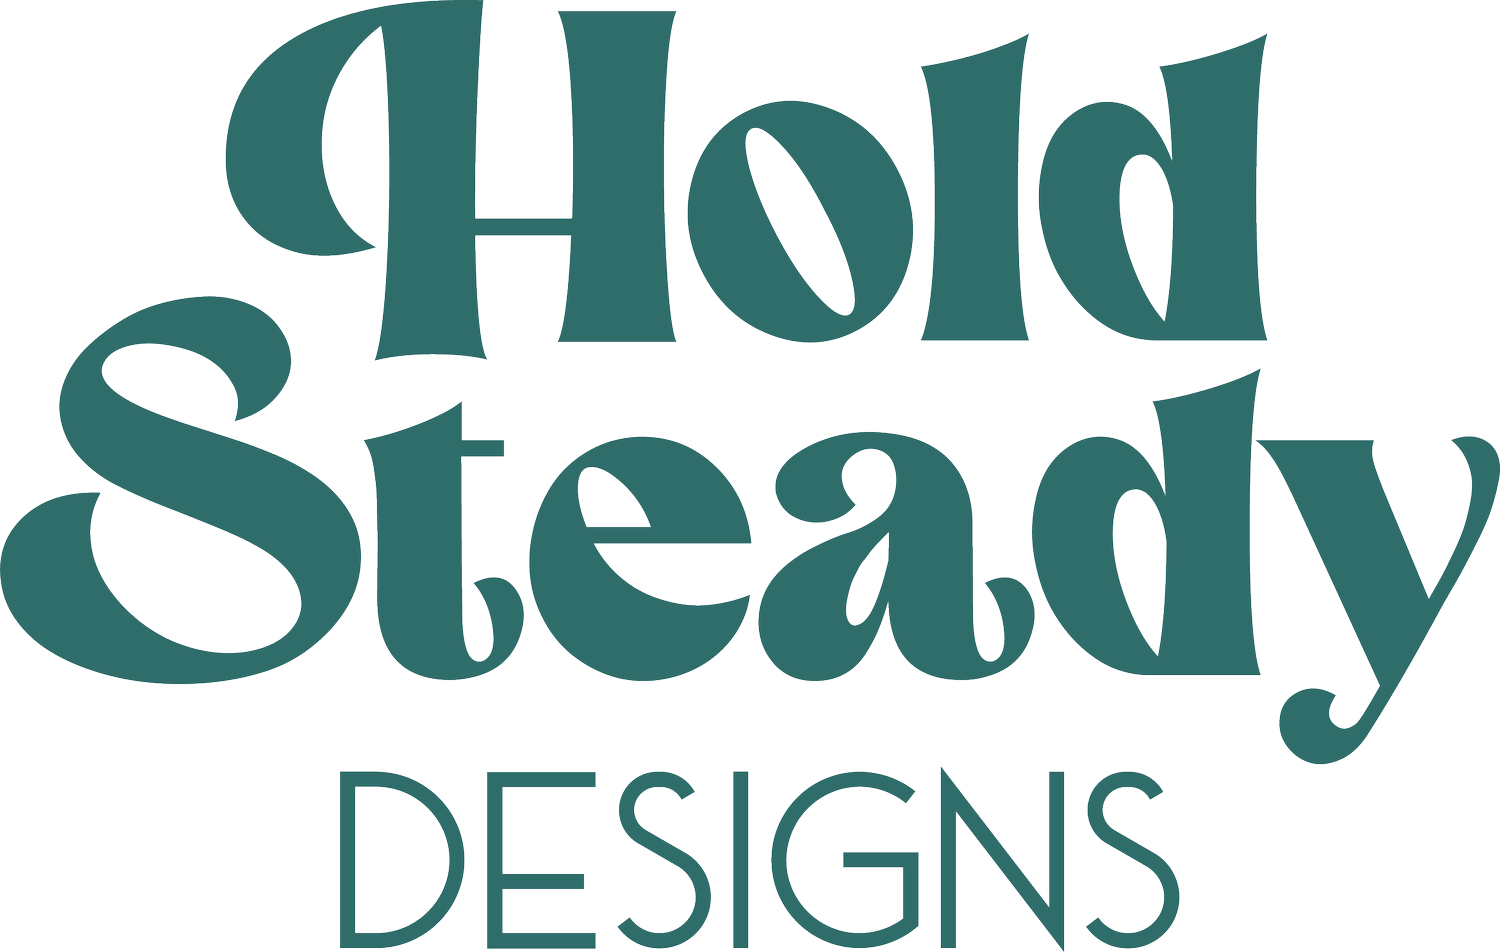 Hold Steady Designs